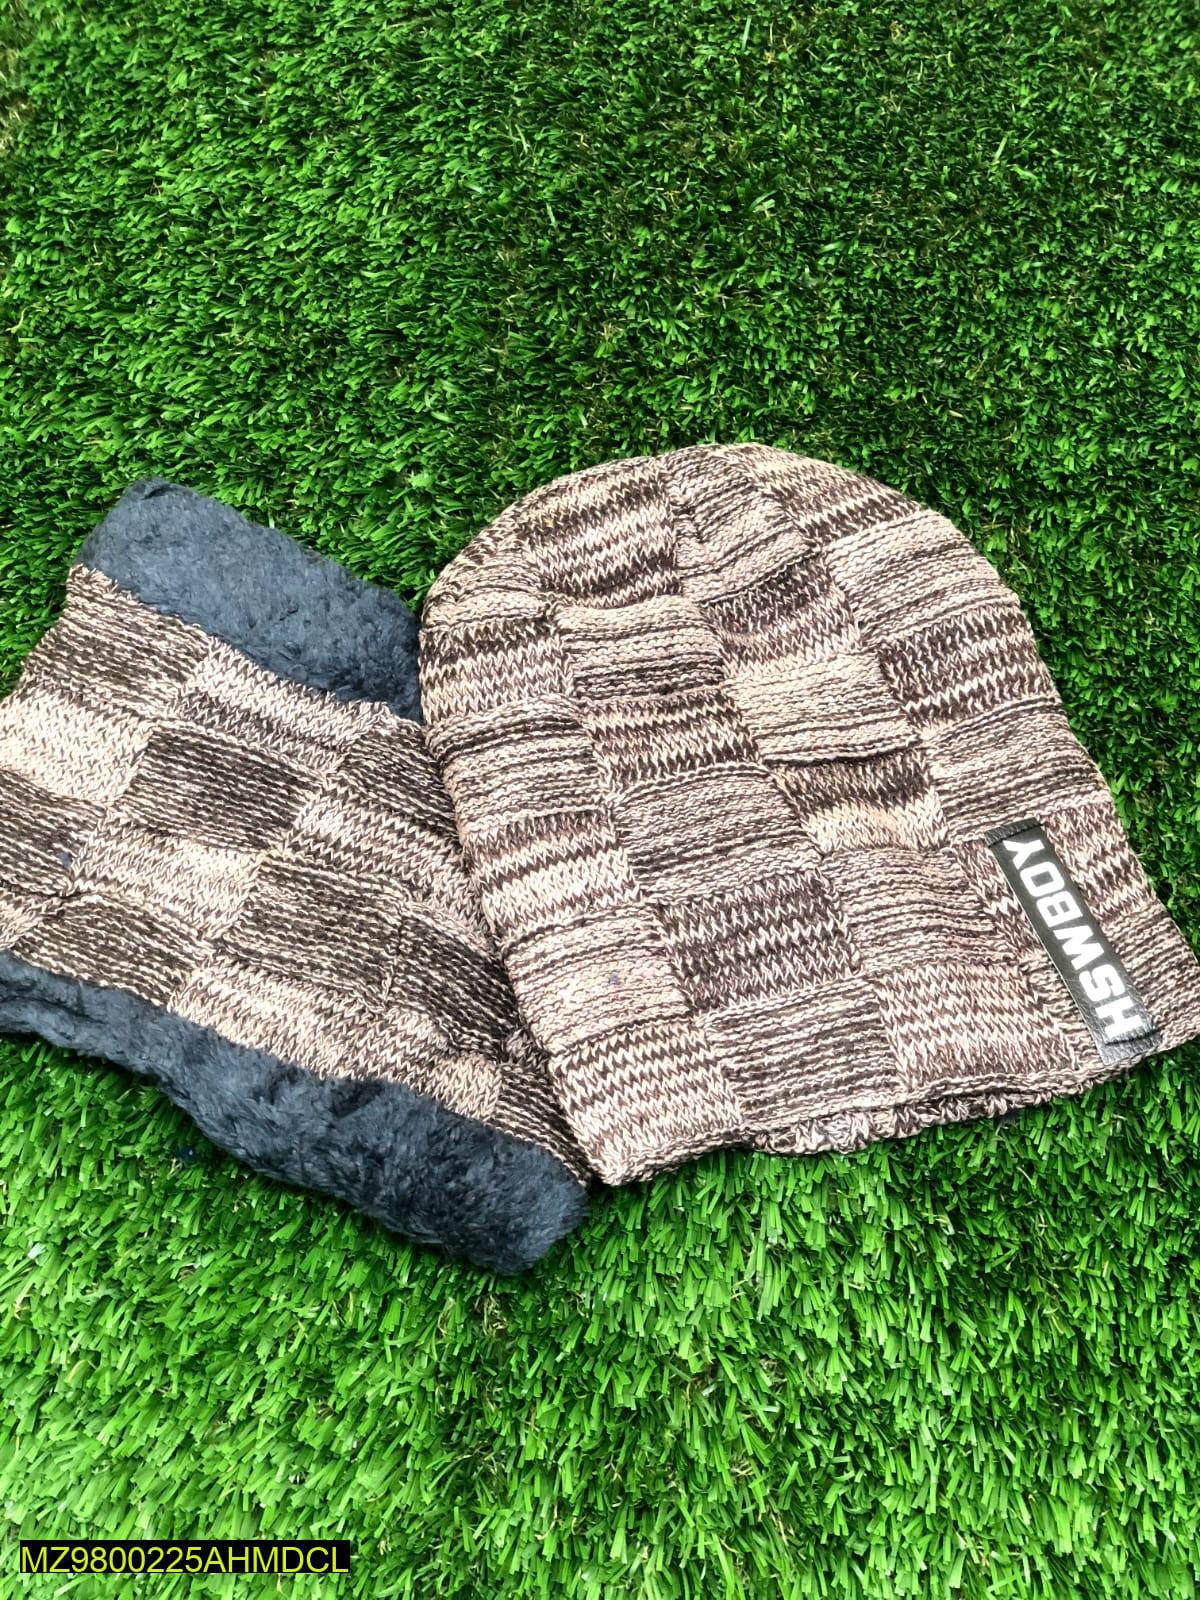 Wool soft cap With Neck Warmer For Unisex